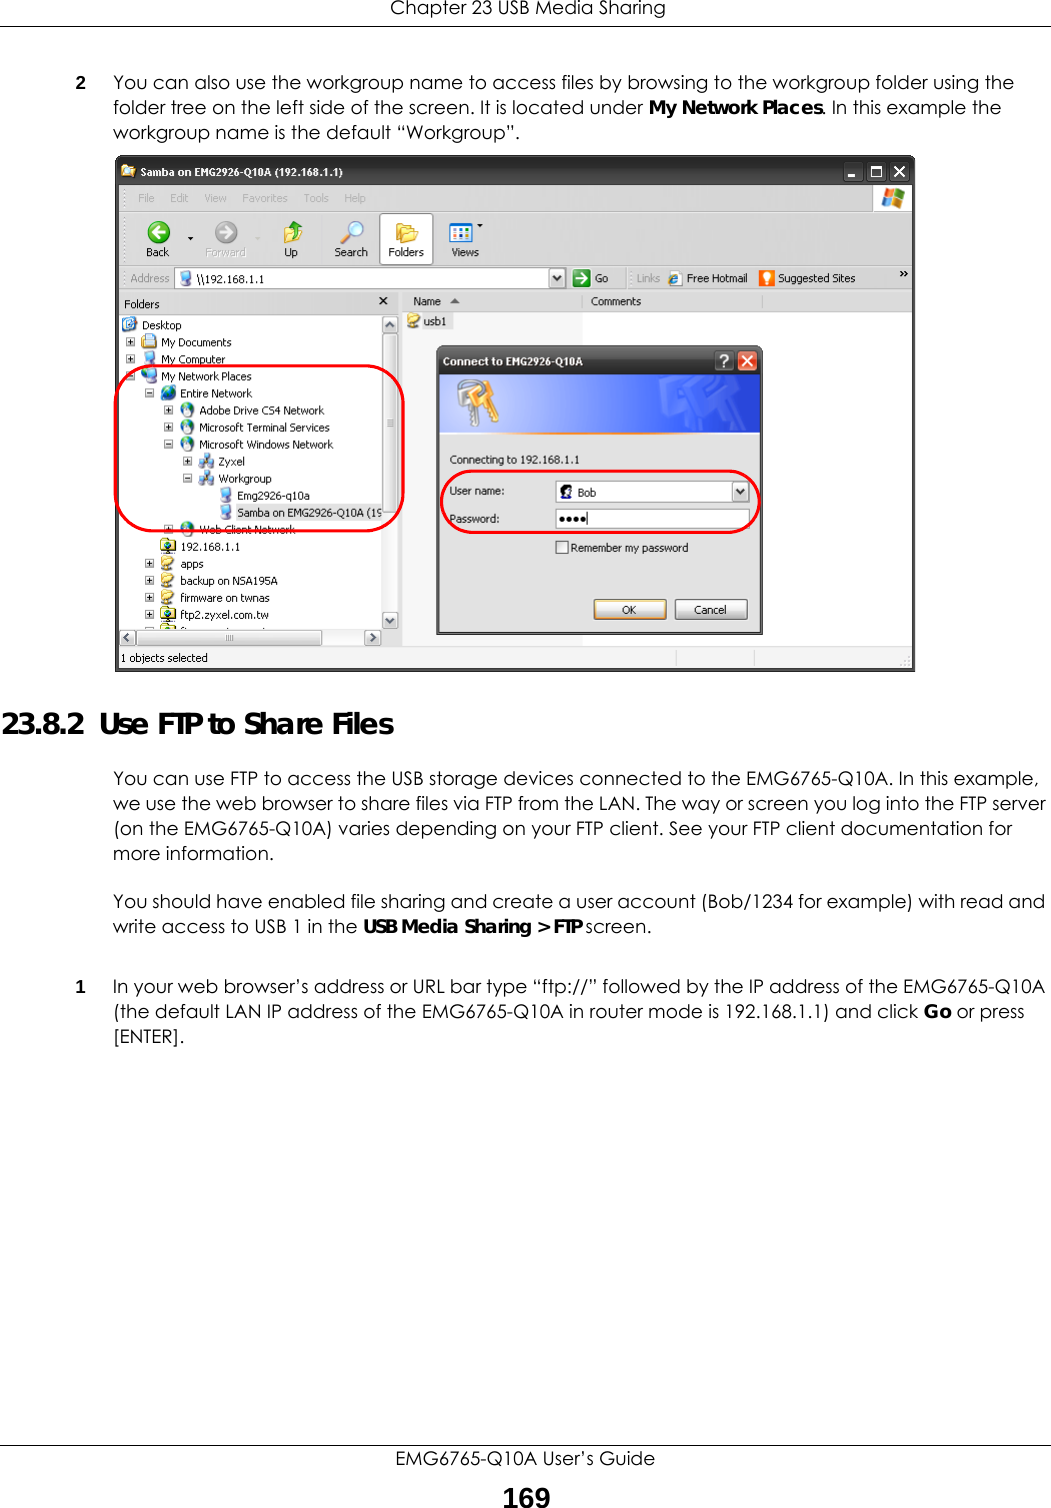  Chapter 23 USB Media SharingEMG6765-Q10A User’s Guide1692You can also use the workgroup name to access files by browsing to the workgroup folder using the folder tree on the left side of the screen. It is located under My Network Places. In this example the workgroup name is the default “Workgroup”. 23.8.2  Use FTP to Share FilesYou can use FTP to access the USB storage devices connected to the EMG6765-Q10A. In this example, we use the web browser to share files via FTP from the LAN. The way or screen you log into the FTP server (on the EMG6765-Q10A) varies depending on your FTP client. See your FTP client documentation for more information. You should have enabled file sharing and create a user account (Bob/1234 for example) with read and write access to USB 1 in the USB Media Sharing &gt; FTP screen.1In your web browser’s address or URL bar type “ftp://” followed by the IP address of the EMG6765-Q10A (the default LAN IP address of the EMG6765-Q10A in router mode is 192.168.1.1) and click Go or press [ENTER].